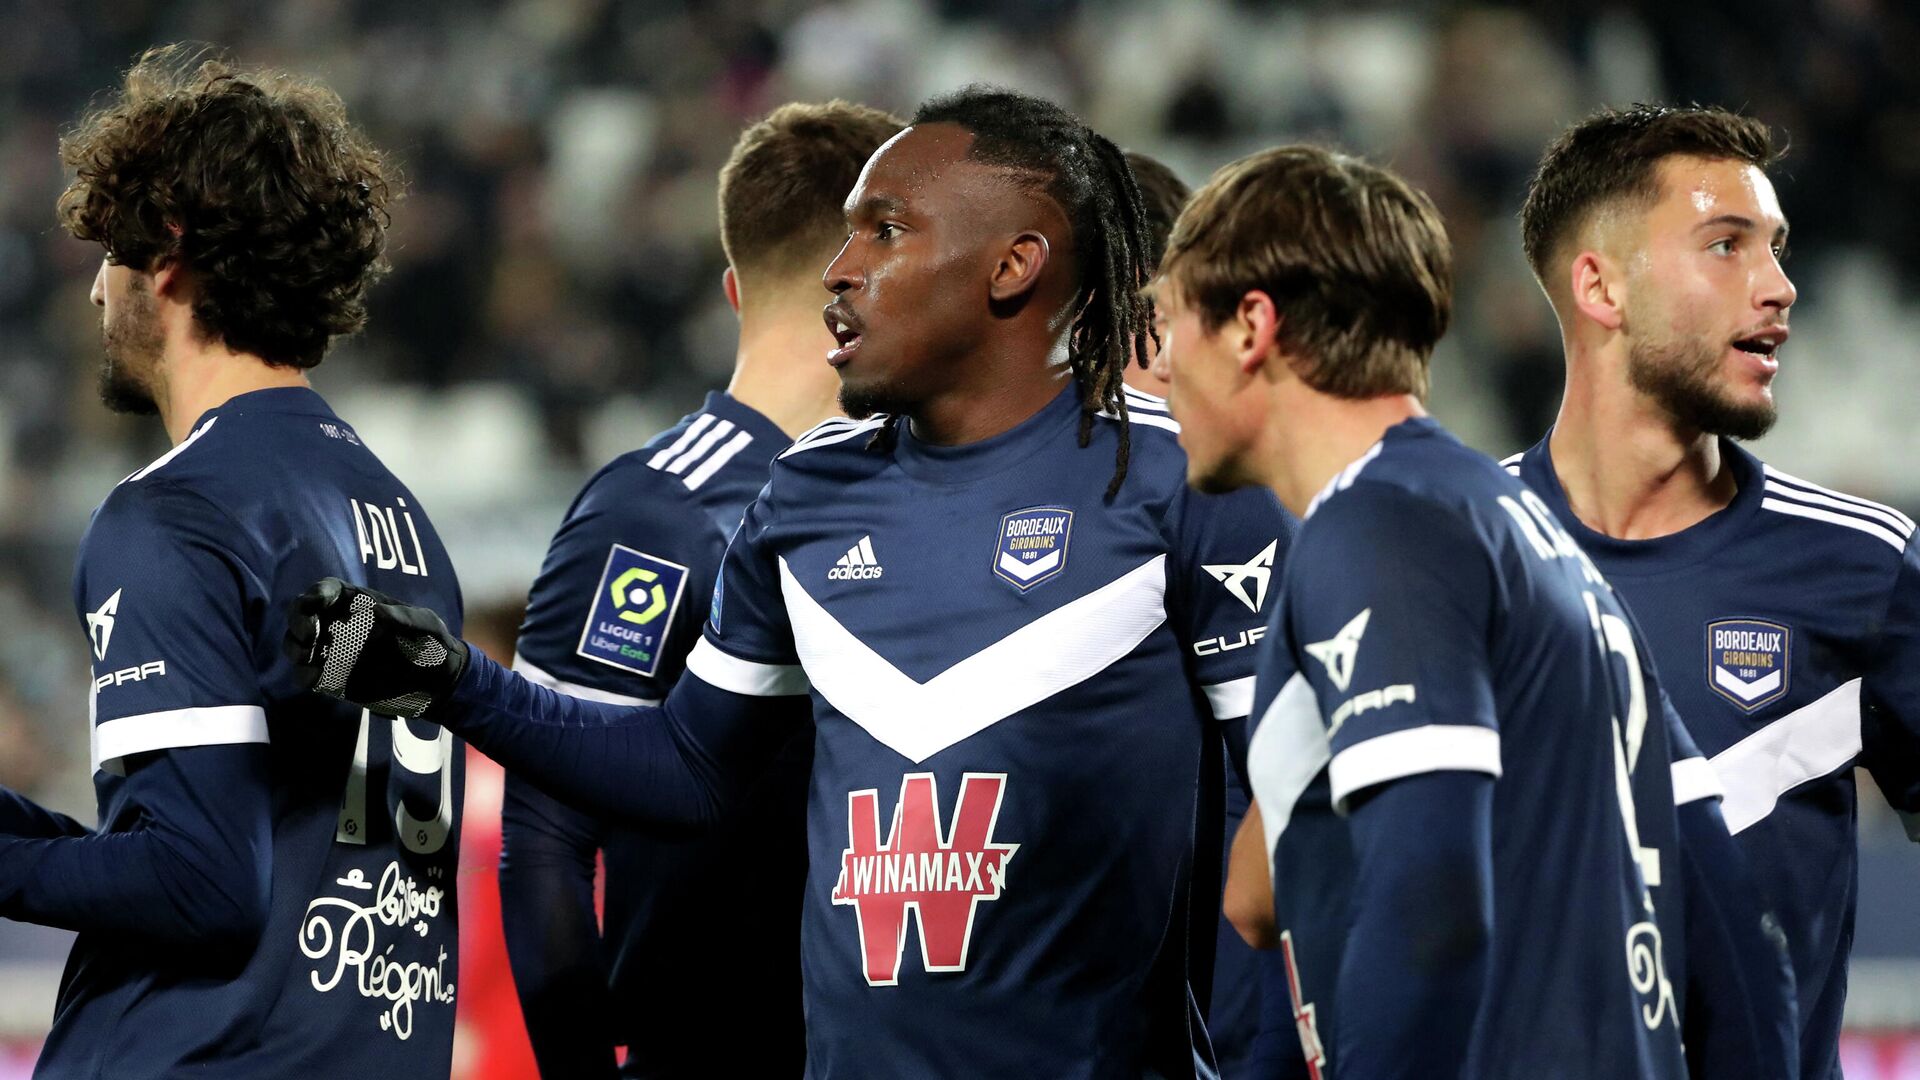 Bordeaux's Honduran forward Alberth Elis (C) celebrates with teammates after he scored his team's second goal during the French L1 football match between FC Girondins de Bordeaux and Olympique Lyonnais (Lyon) at The Matmut Atlantique Stadium in Bordeaux, south-western France, on December 5, 2021. (Photo by ROMAIN PERROCHEAU / AFP) - РИА Новости, 1920, 06.12.2021